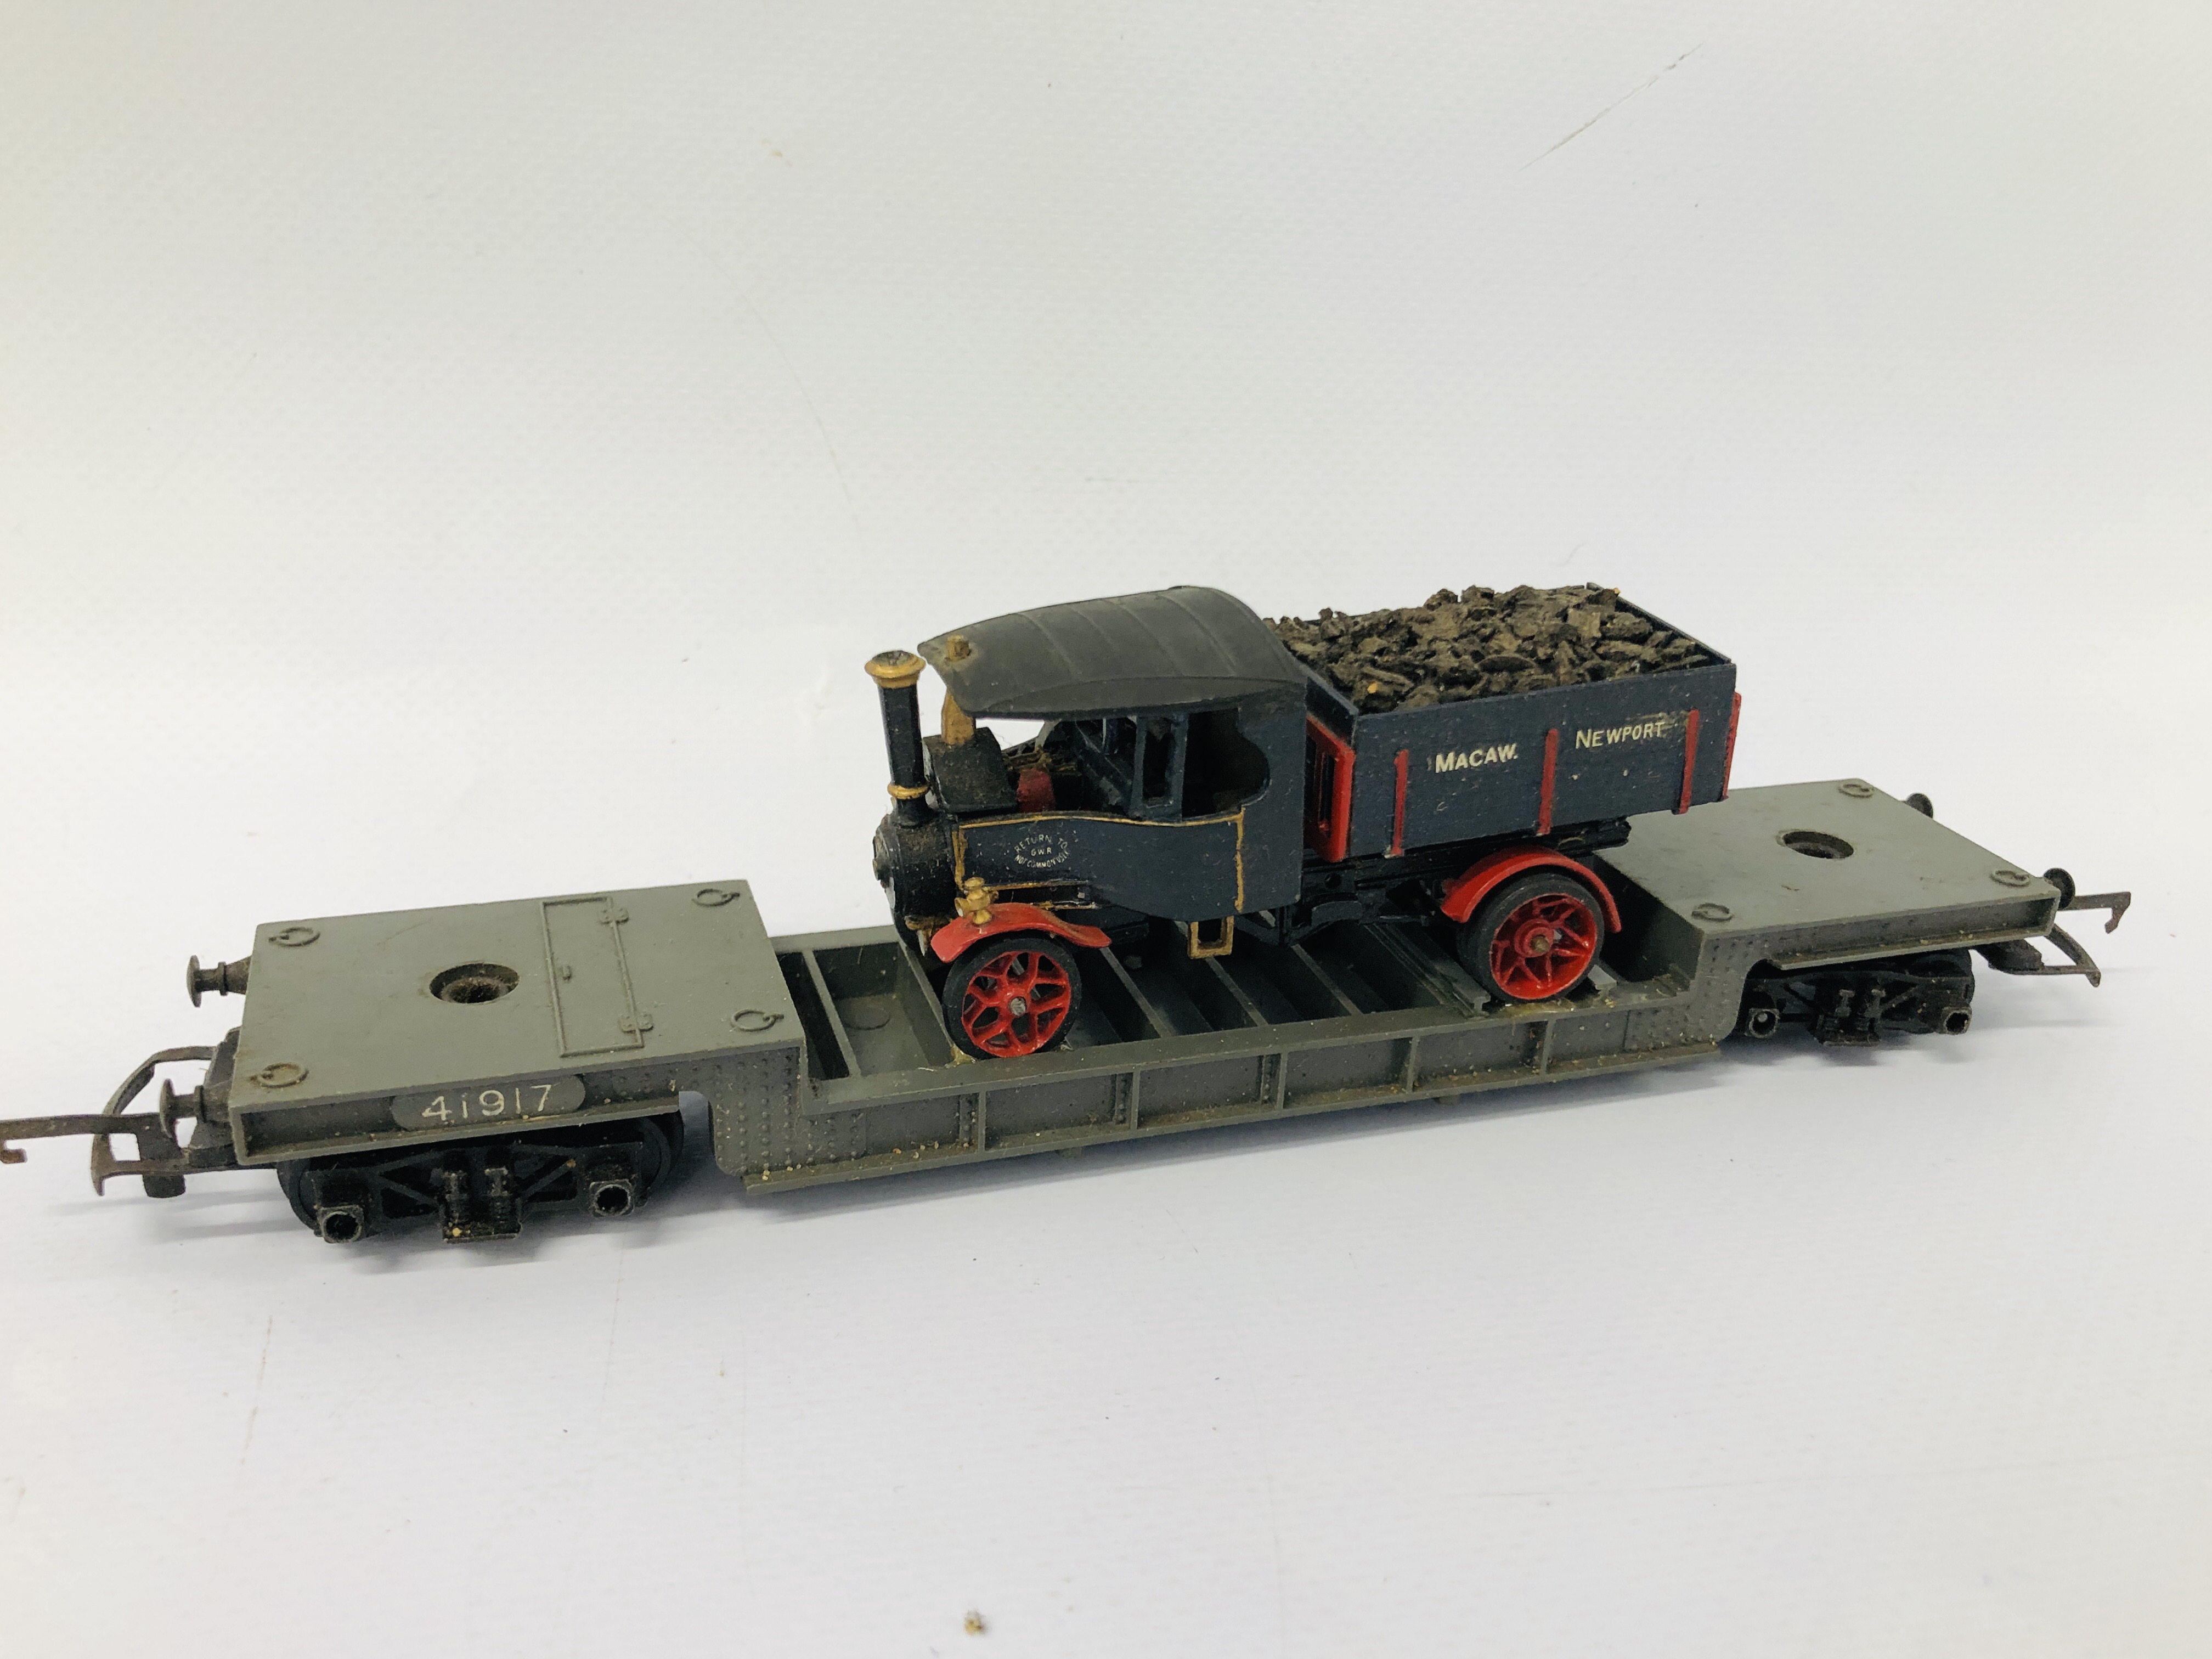 A HORNBY DUBO MECCANO 00 GAUGE DUCHESS OF MONTROSE LOCOMOTIVE & 3 TRIANG 00 GAUGE WAGONS WITH CARGO - Image 6 of 14